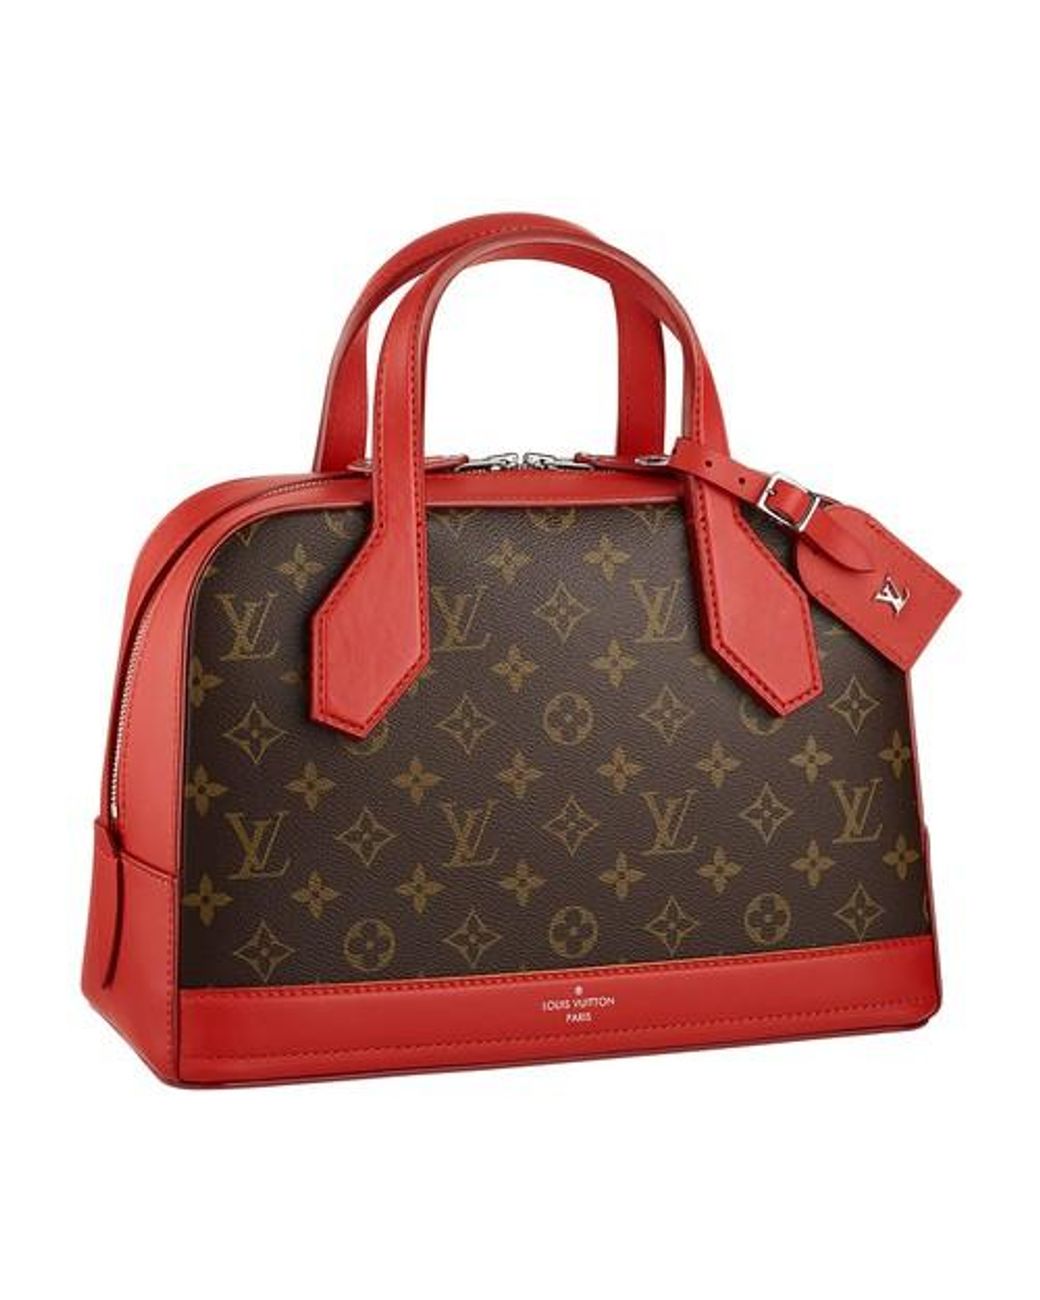 louis vuitton small red purse